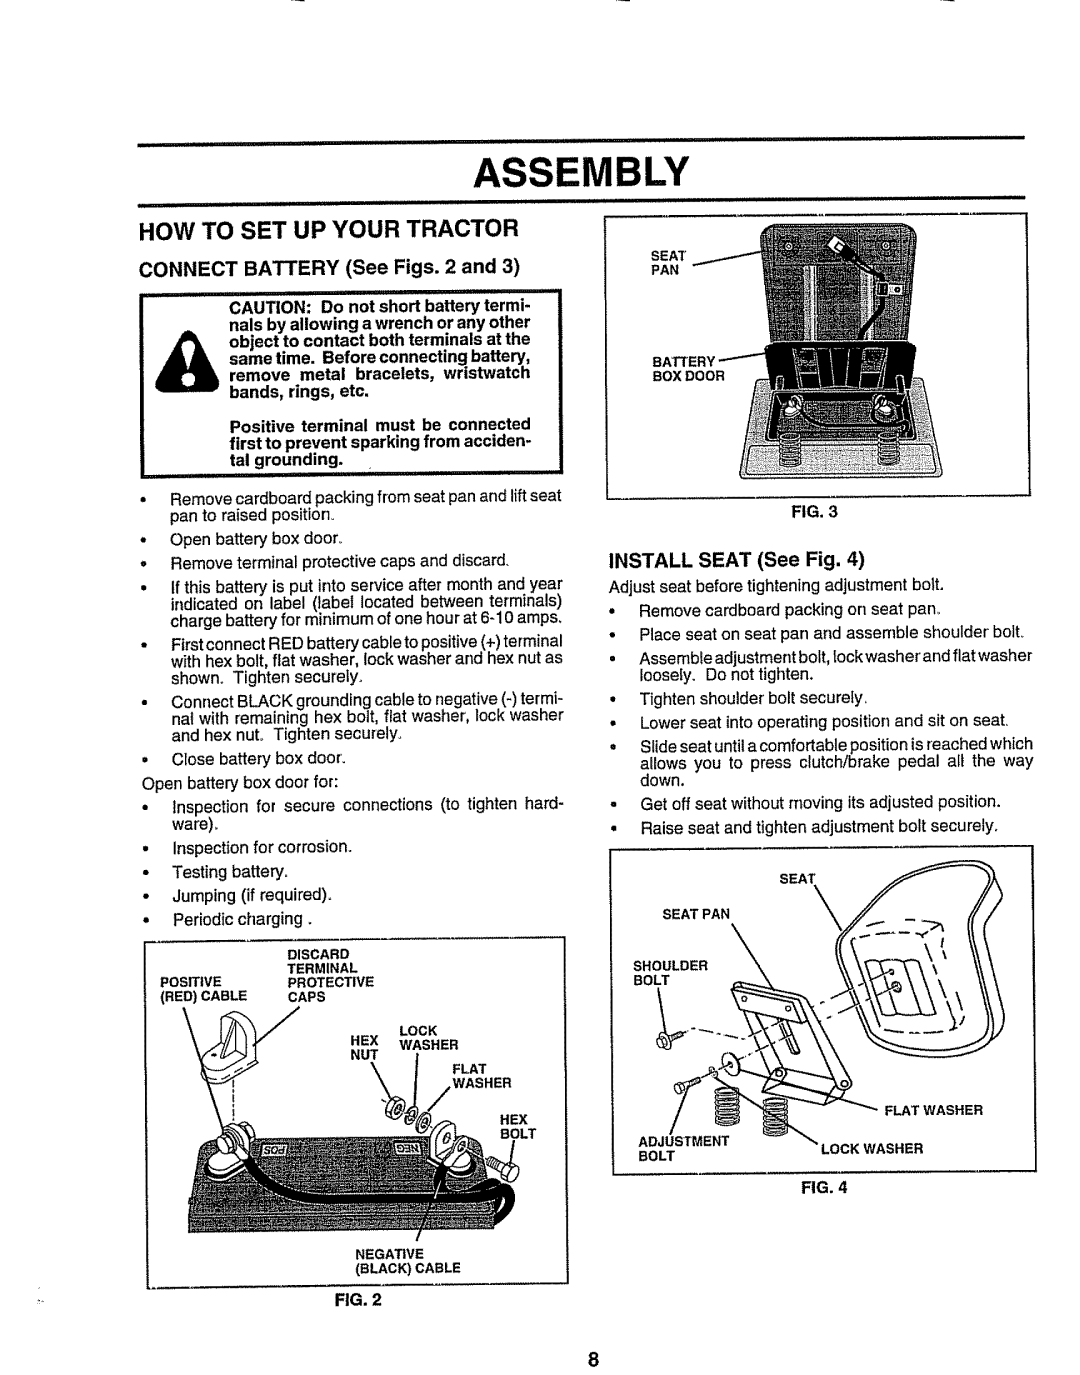 Sears 917.258473 owner manual Assembly, How To Set Up Your Tractor, CONNECT BATTERY See Figs. 2 and, INSTALL SEAT See Fig 